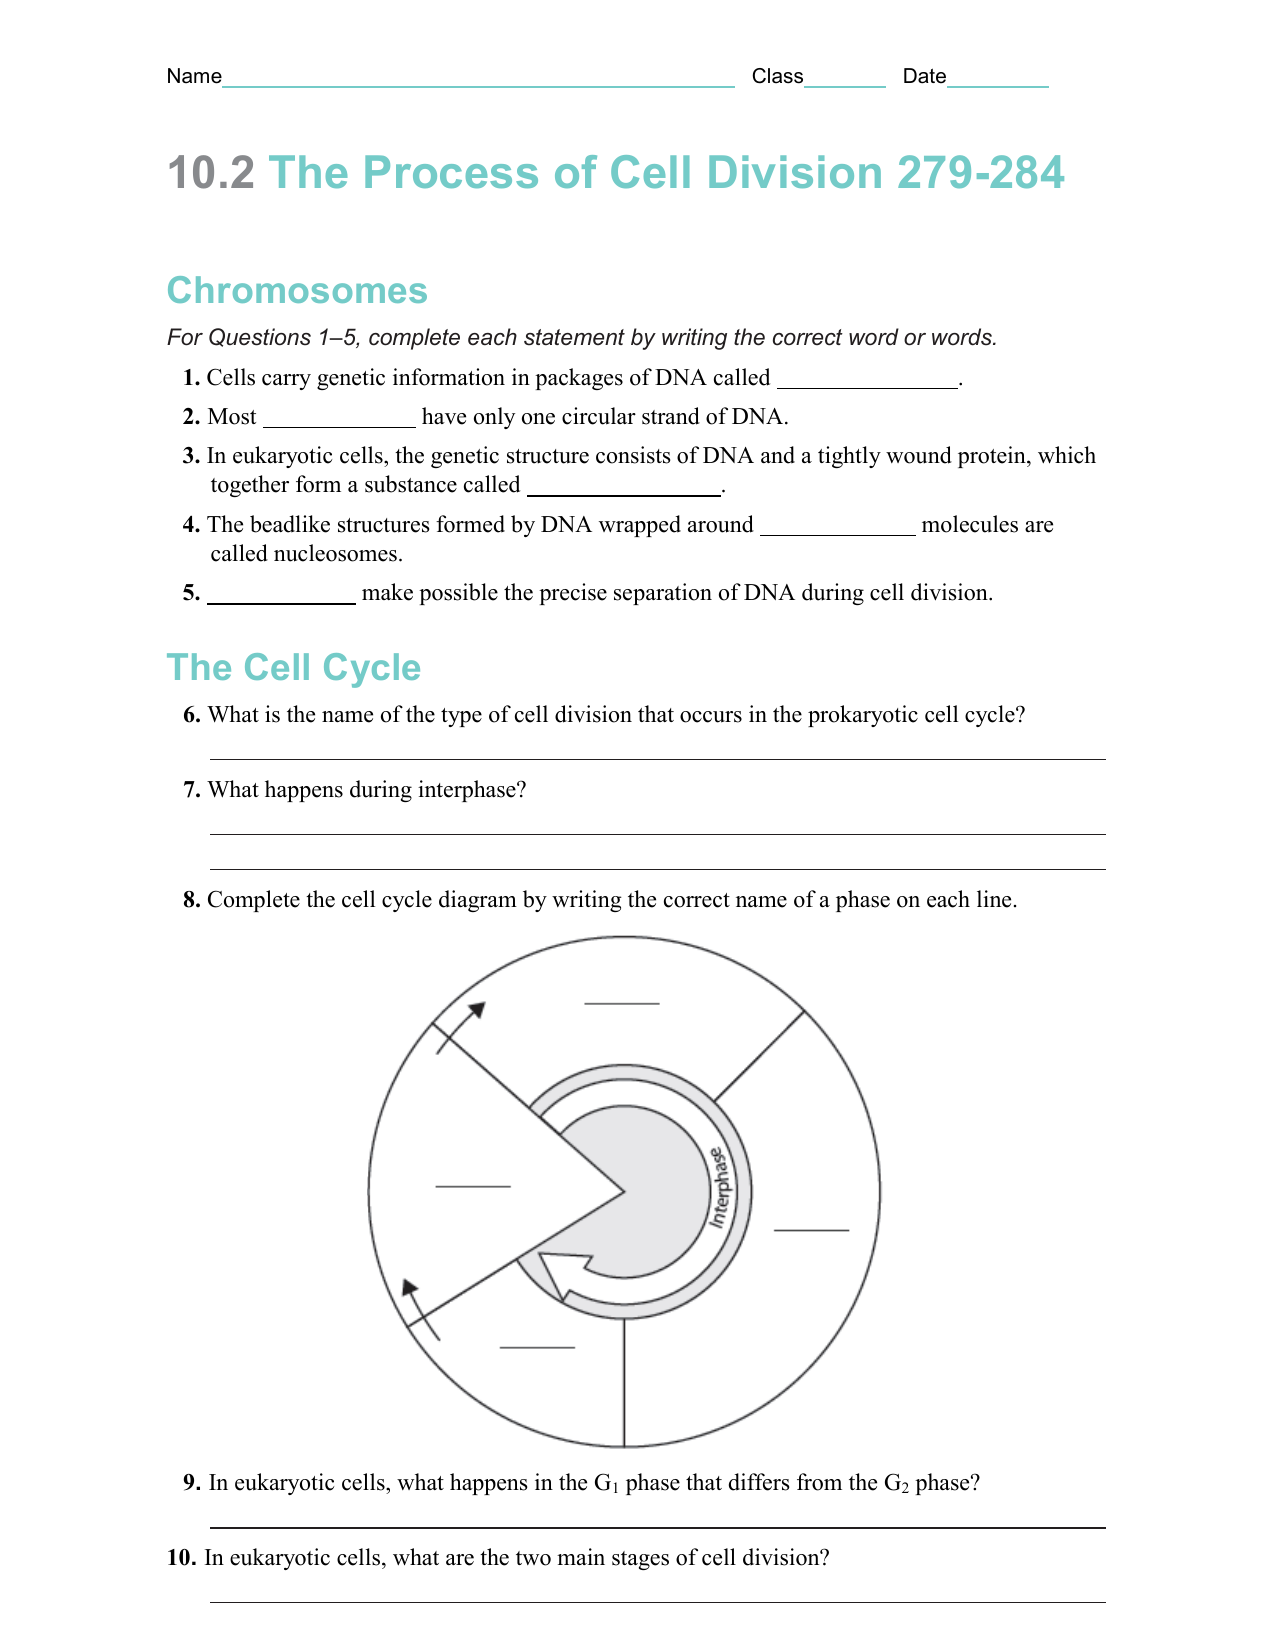 244.24 The Process of Cell Division 2479-2484 In The Cell Cycle Worksheet